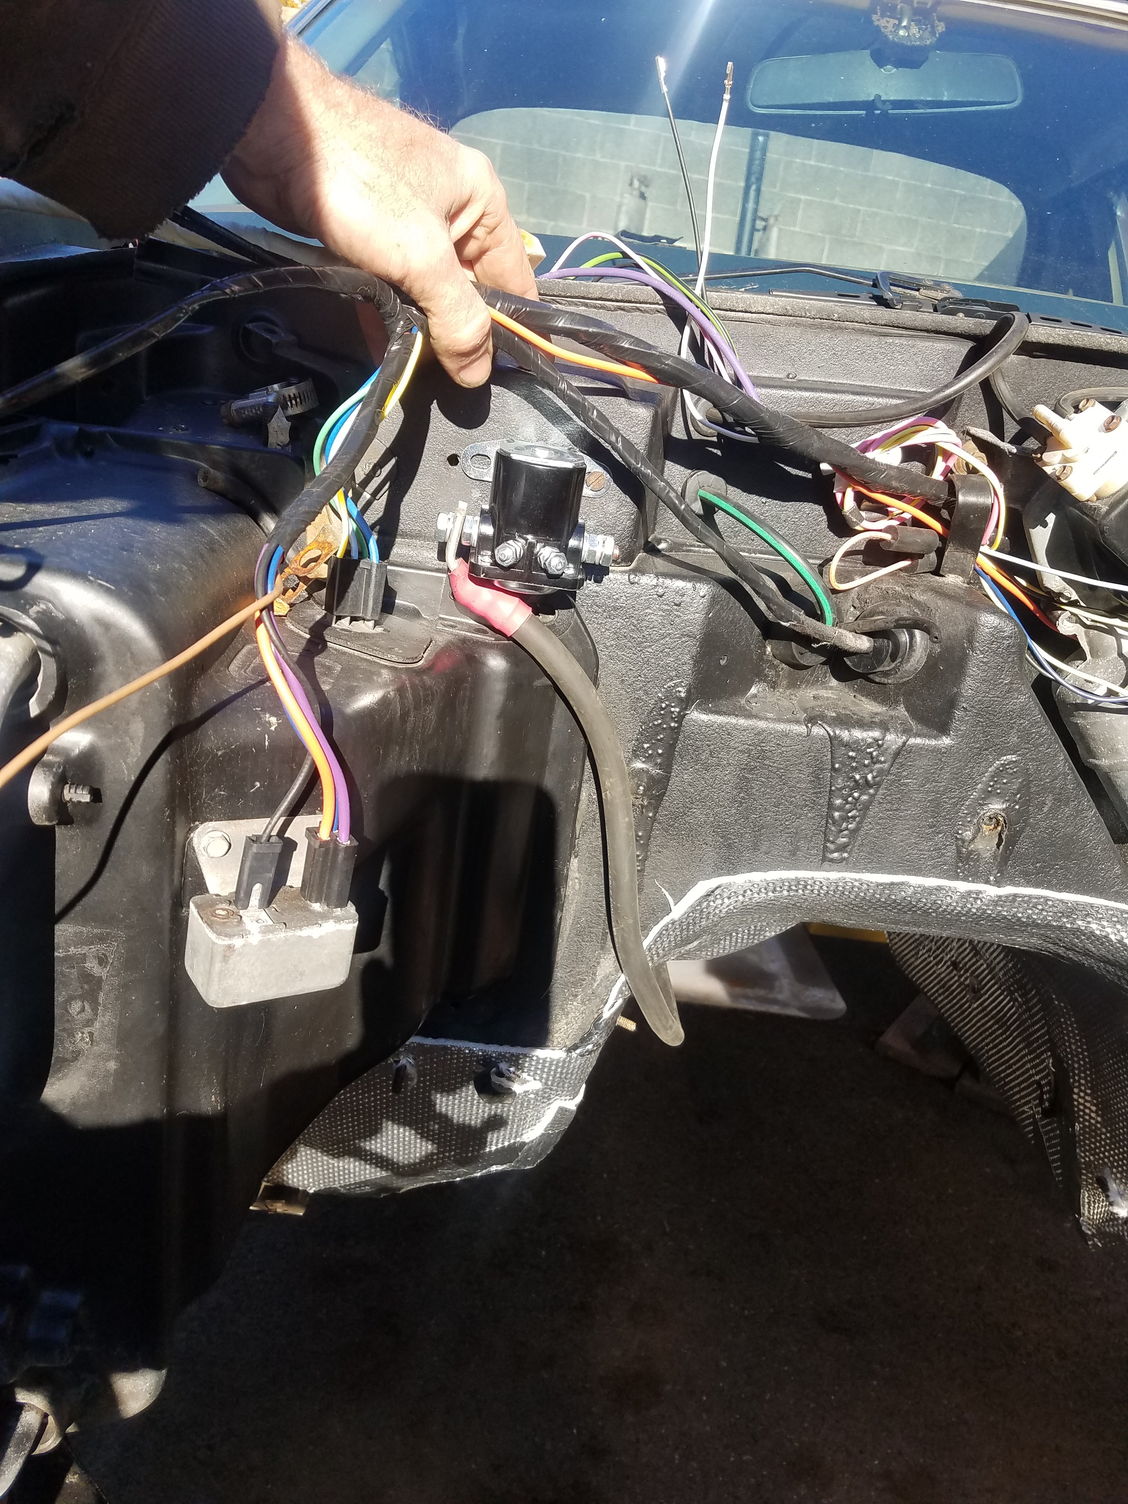 74 engine wire harness, where is starter override connection